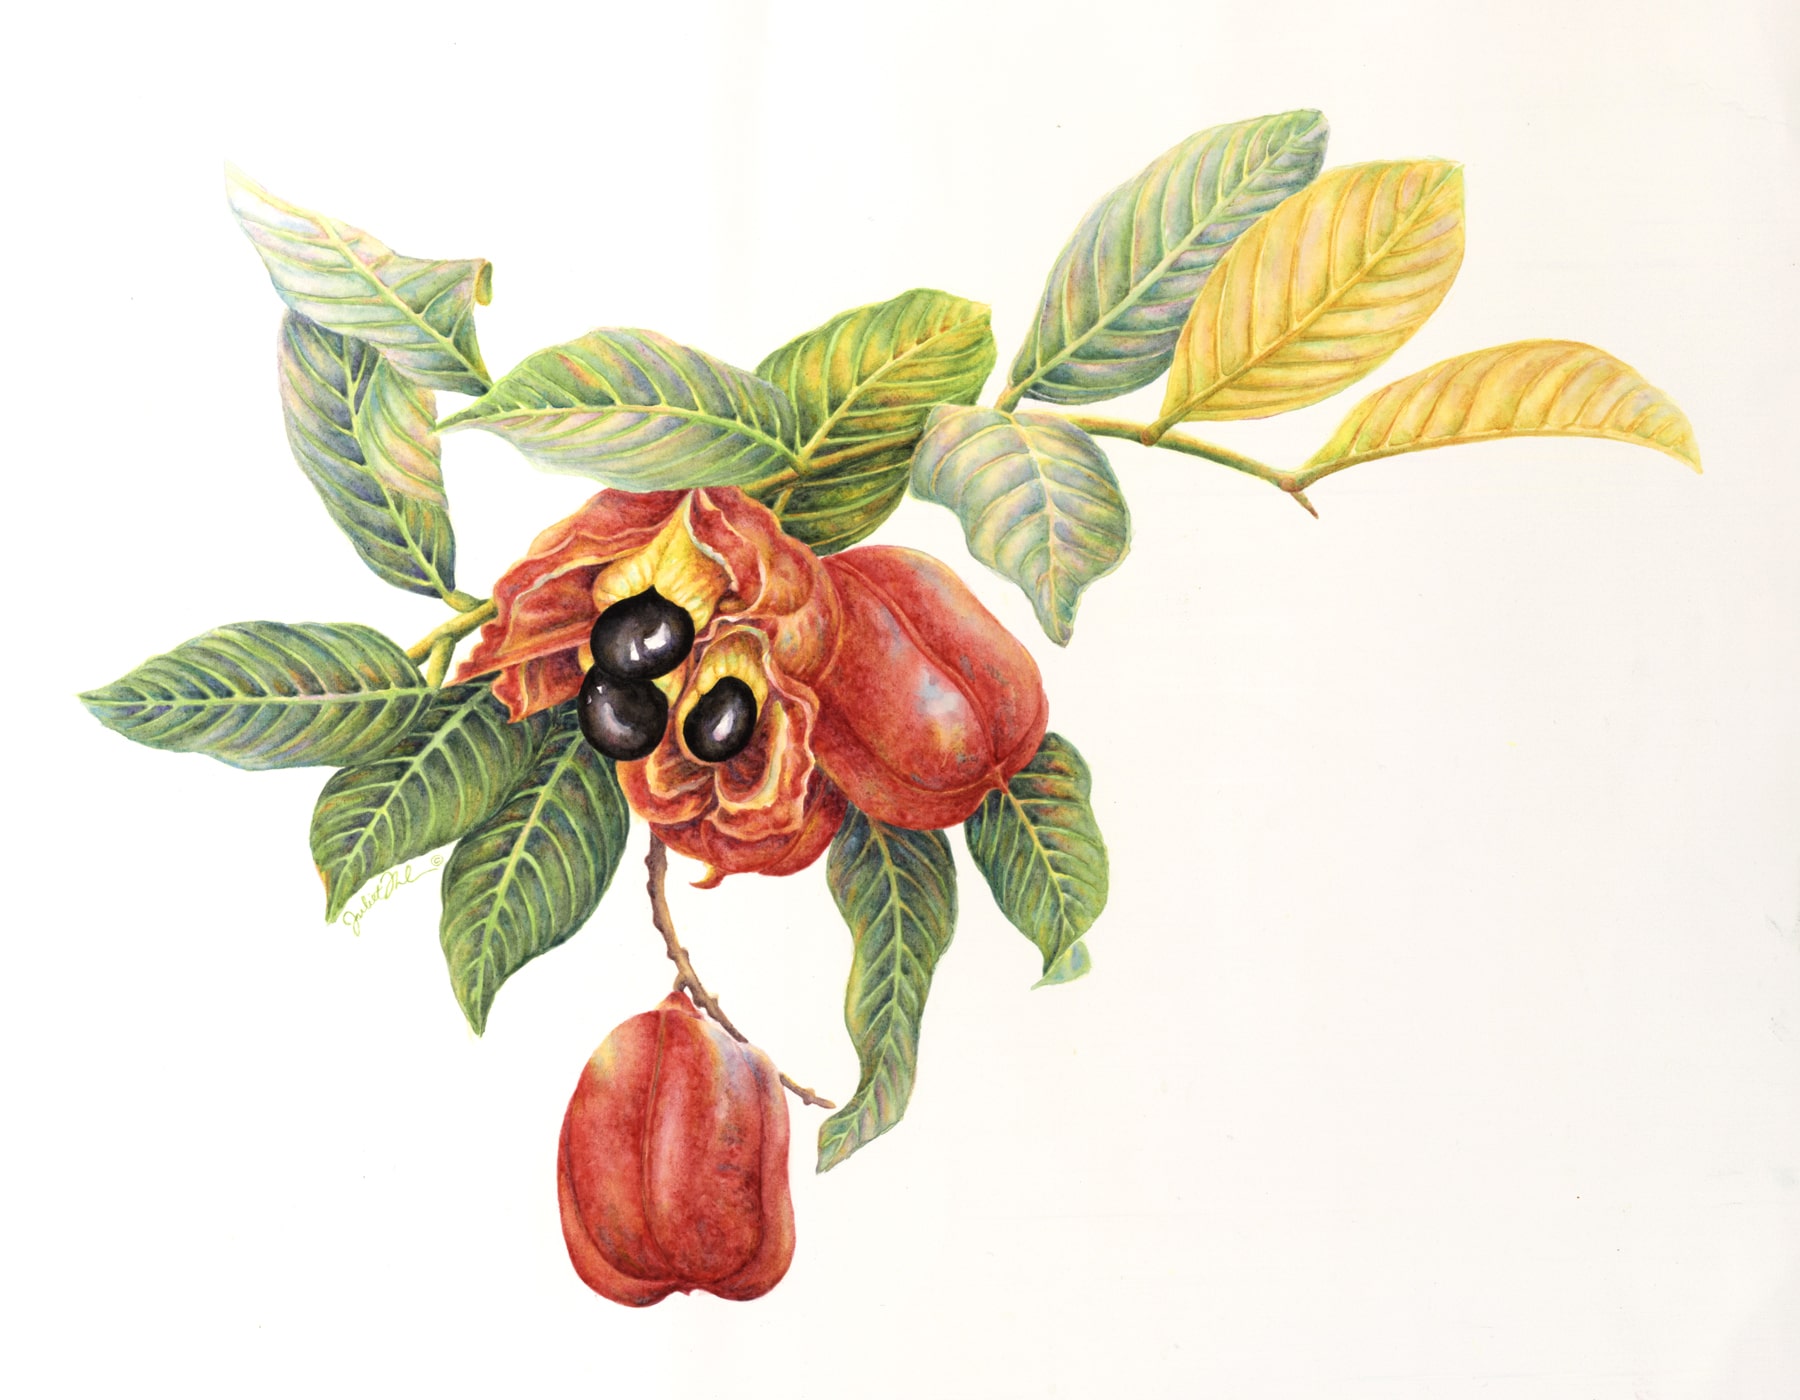 Ackee & Leaves: Watercolor on paper